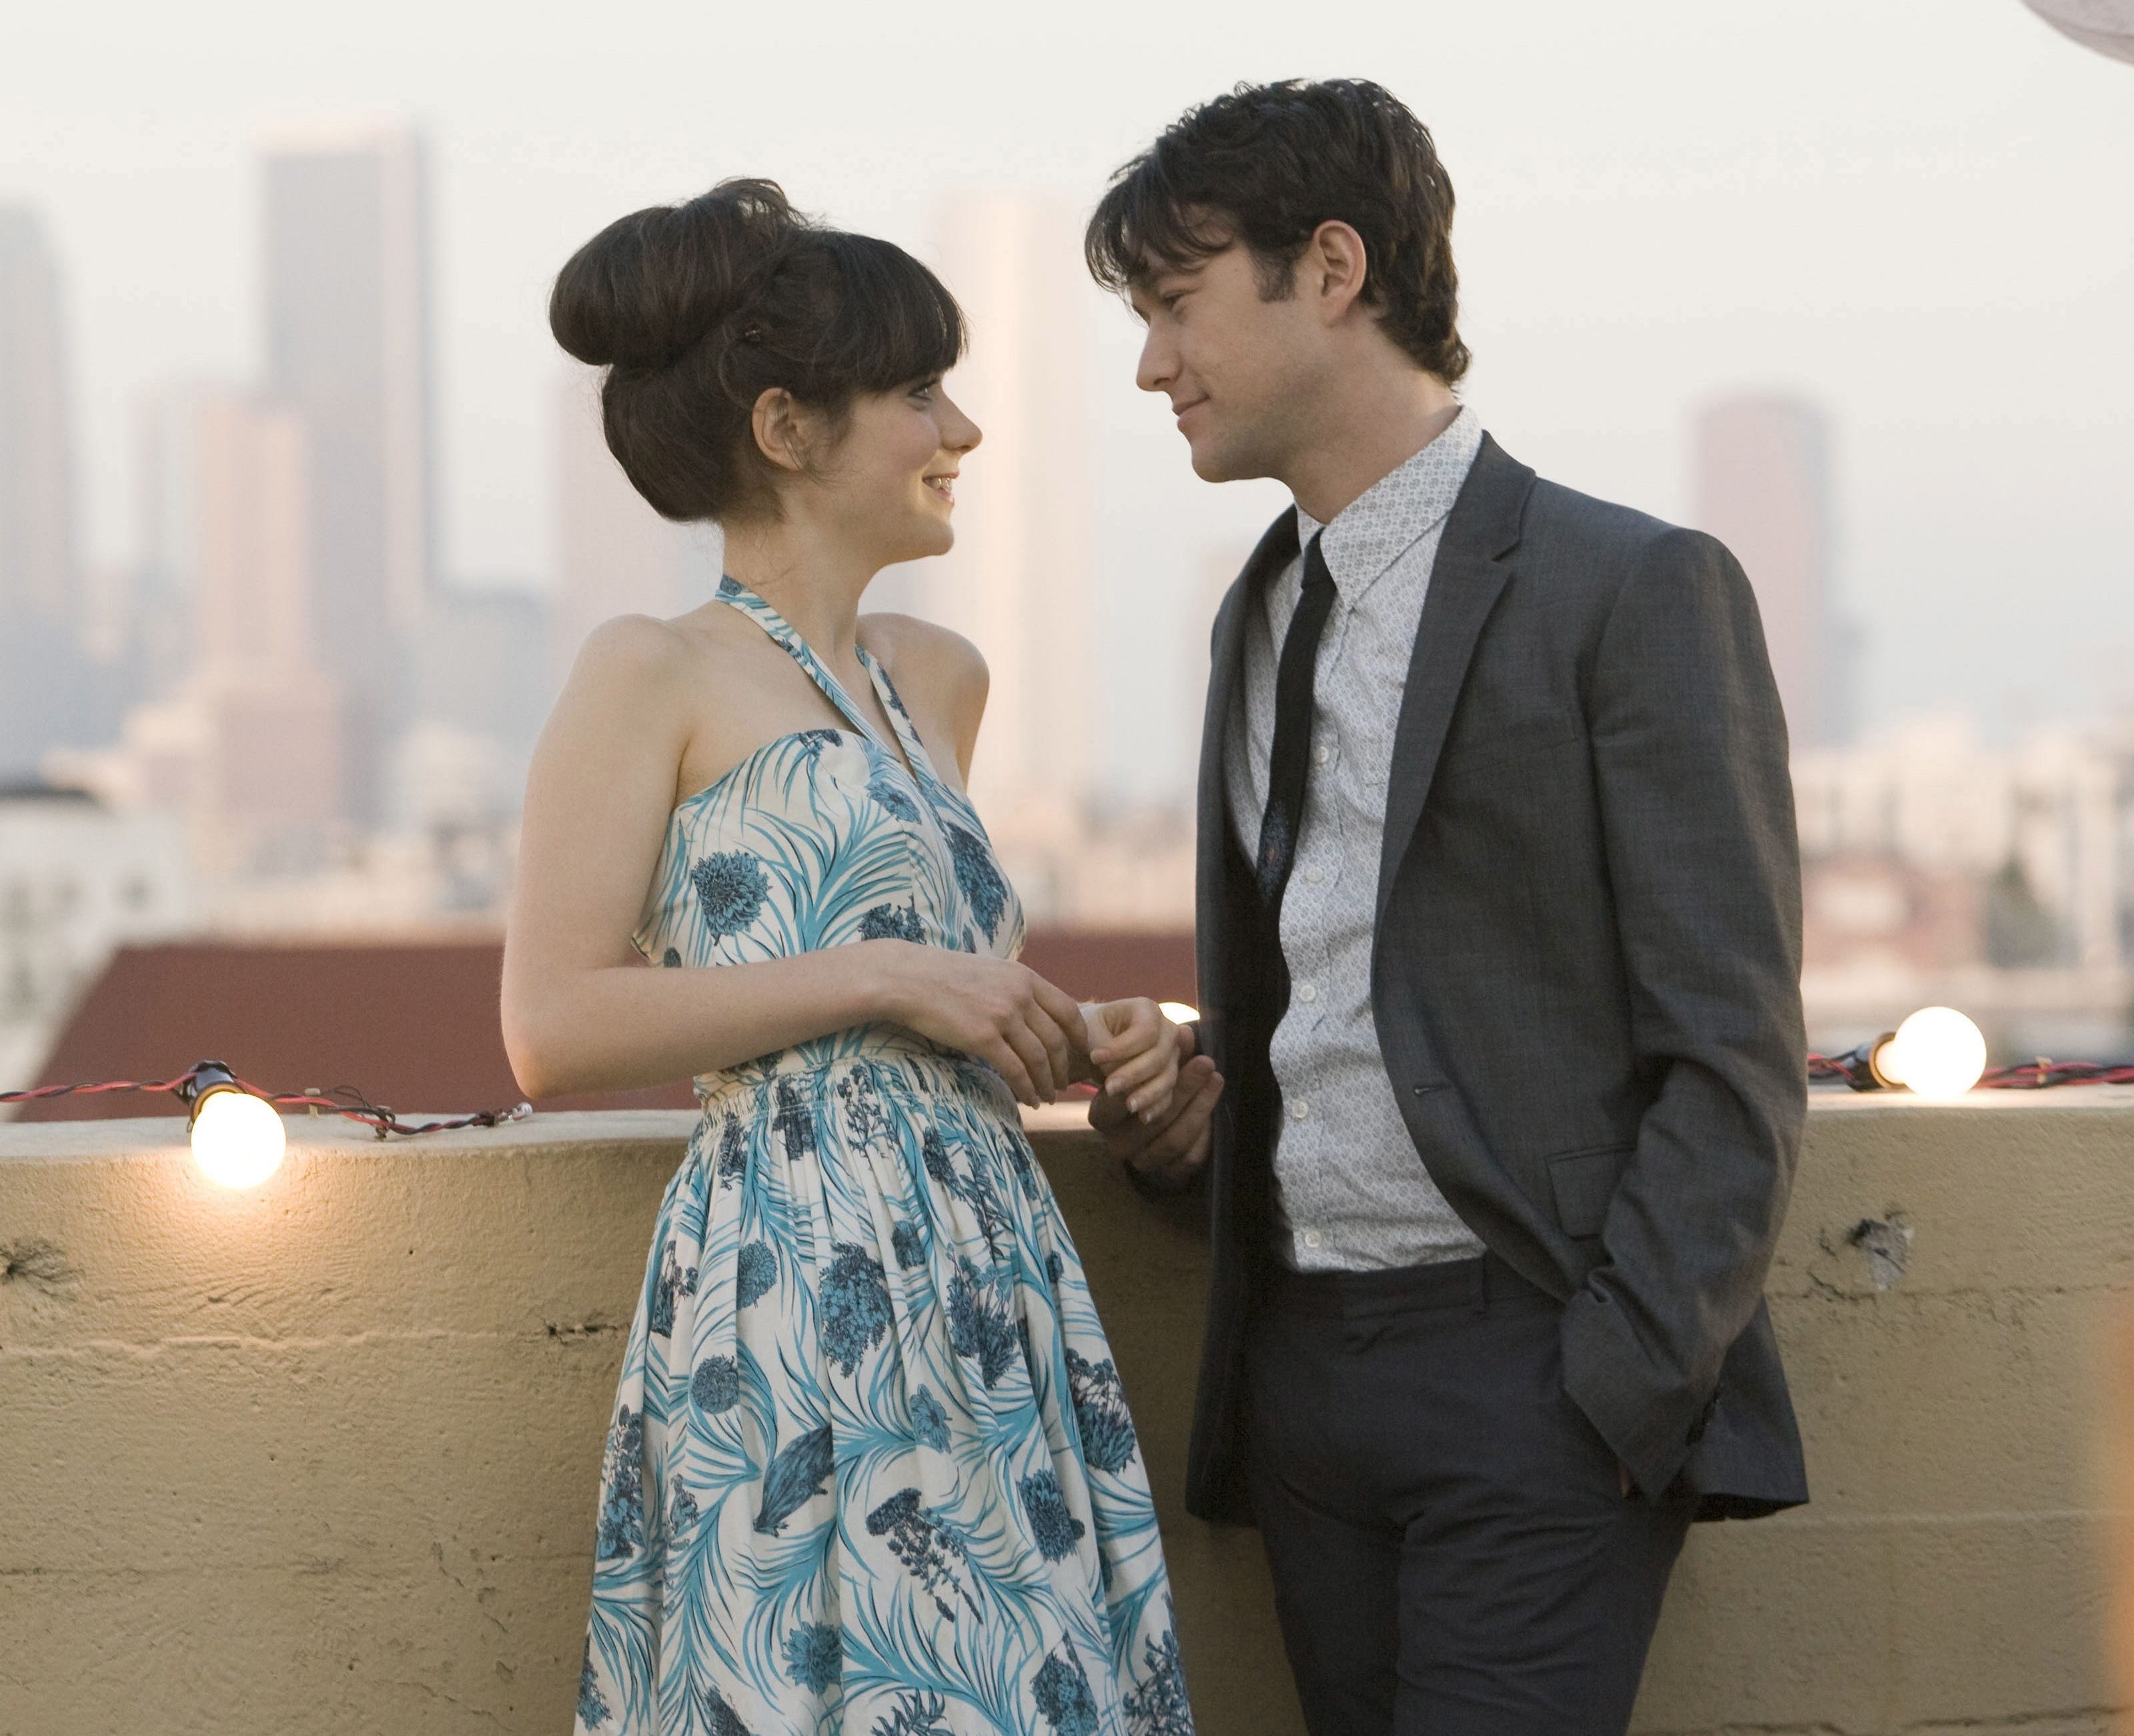 toxic main characters who aren't that great - 500 days of summer